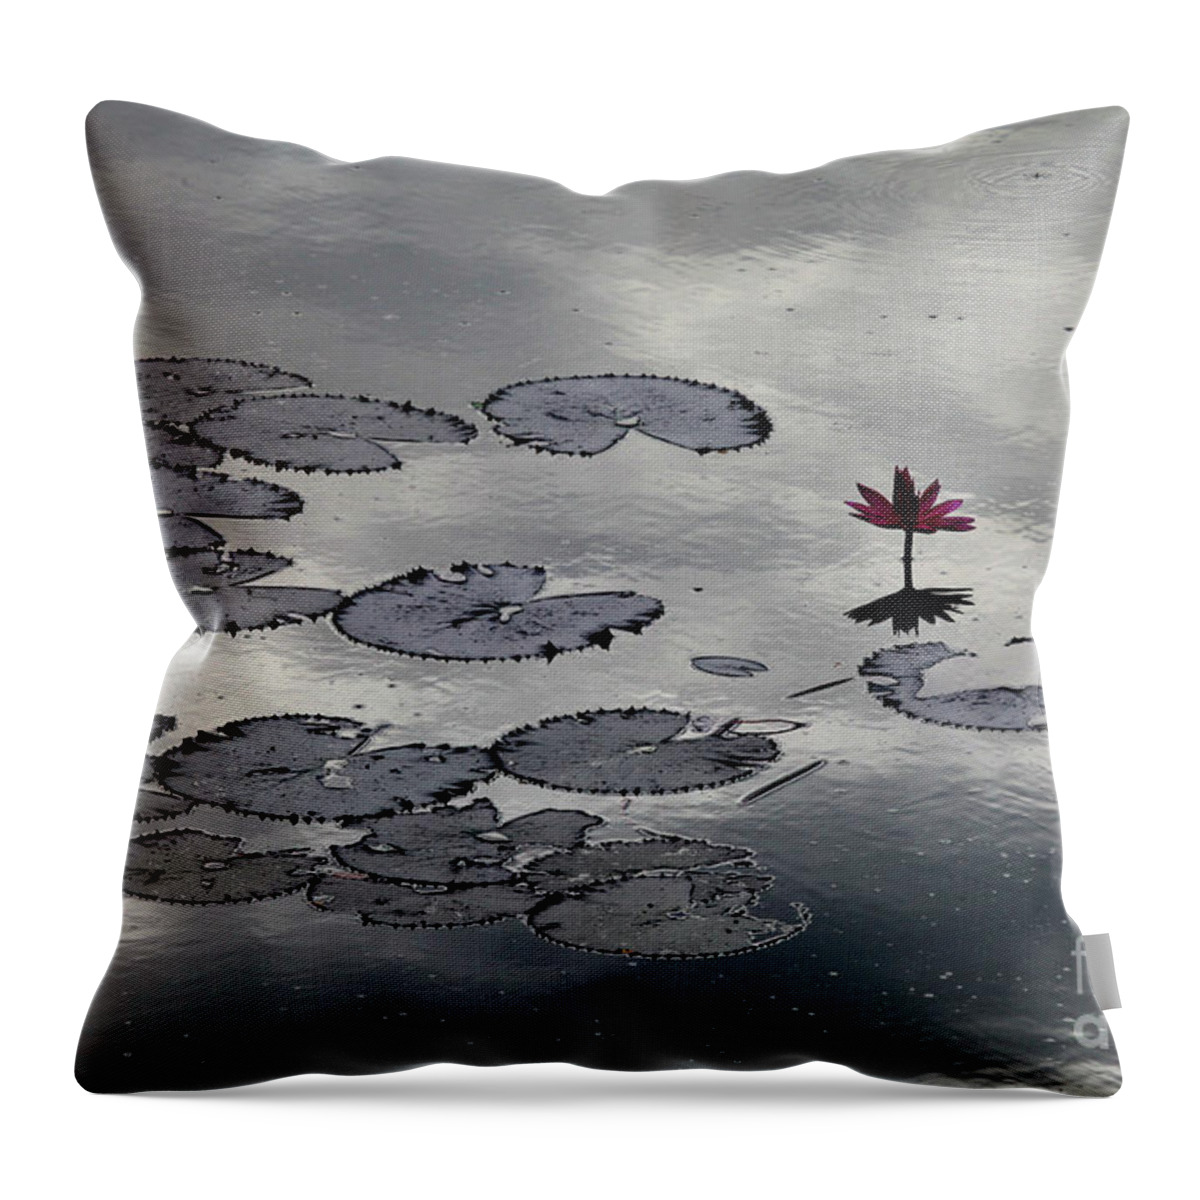  Throw Pillow featuring the digital art Lilly Mirror by Darcy Dietrich